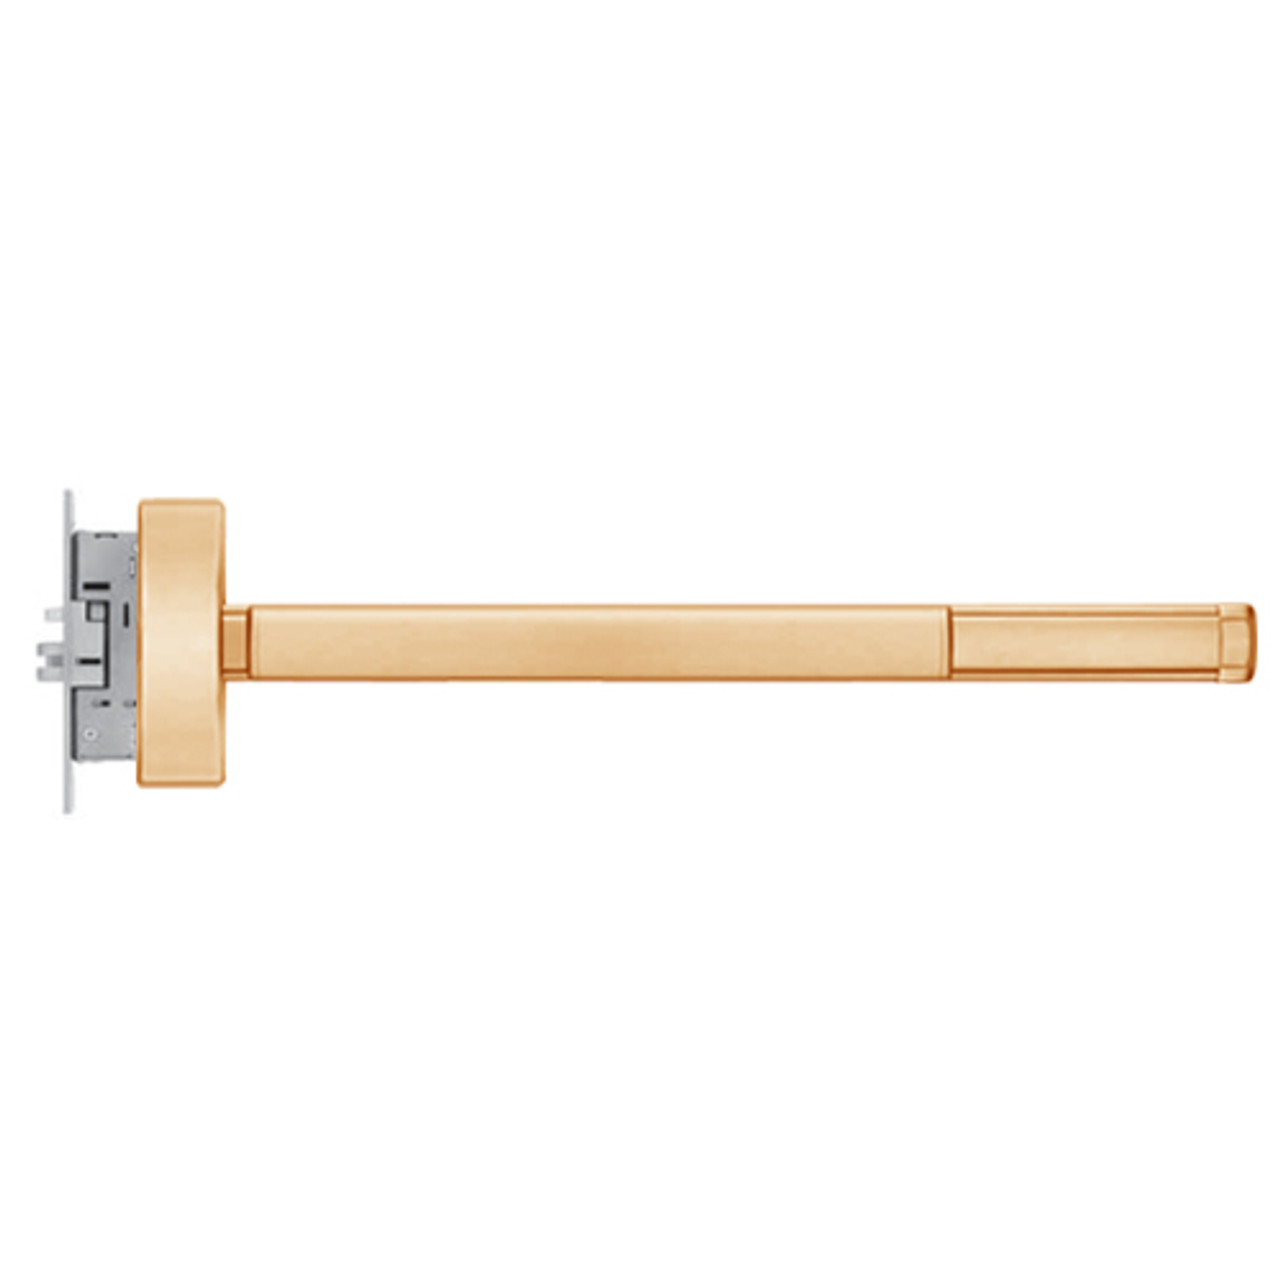 TS2315-RHR-612-48 PHI 2300 Series Apex Mortise Exit Device with Touchbar Monitoring Switch Prepped for Thumb Piece Always Active in Satin Bronze Finish